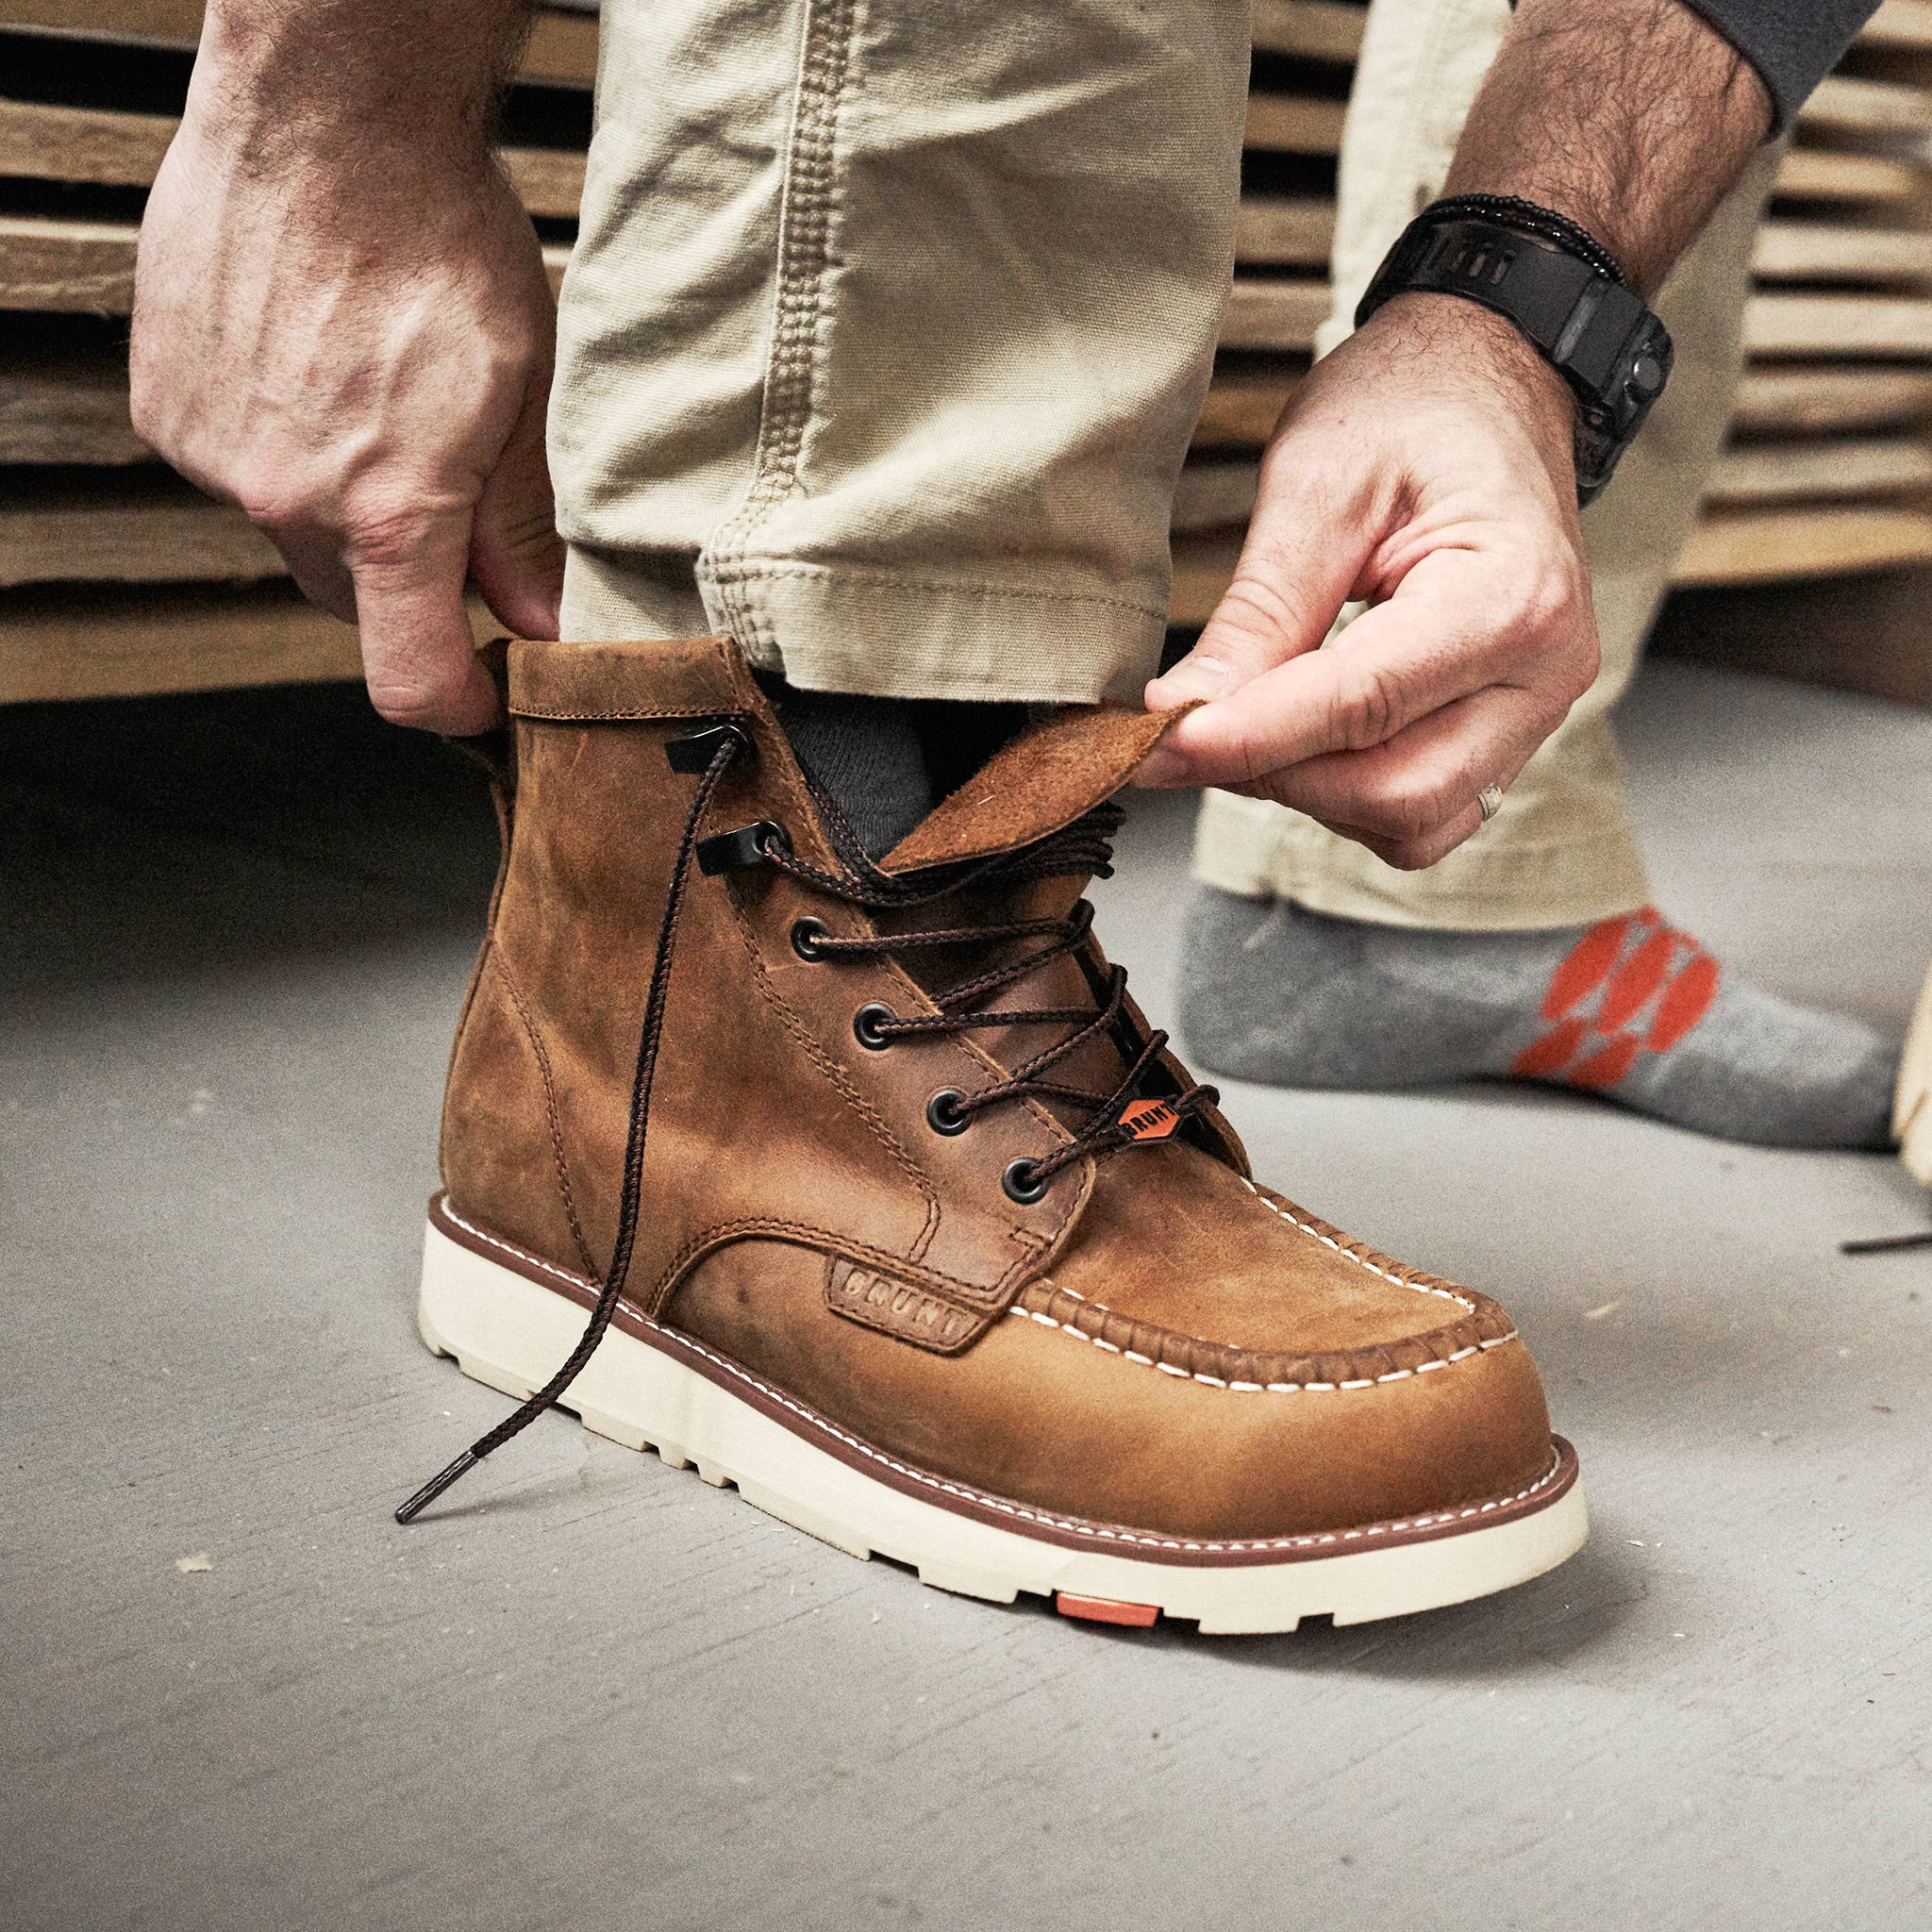 How to Waterproof Your Construction Boots for Protection - IronPros